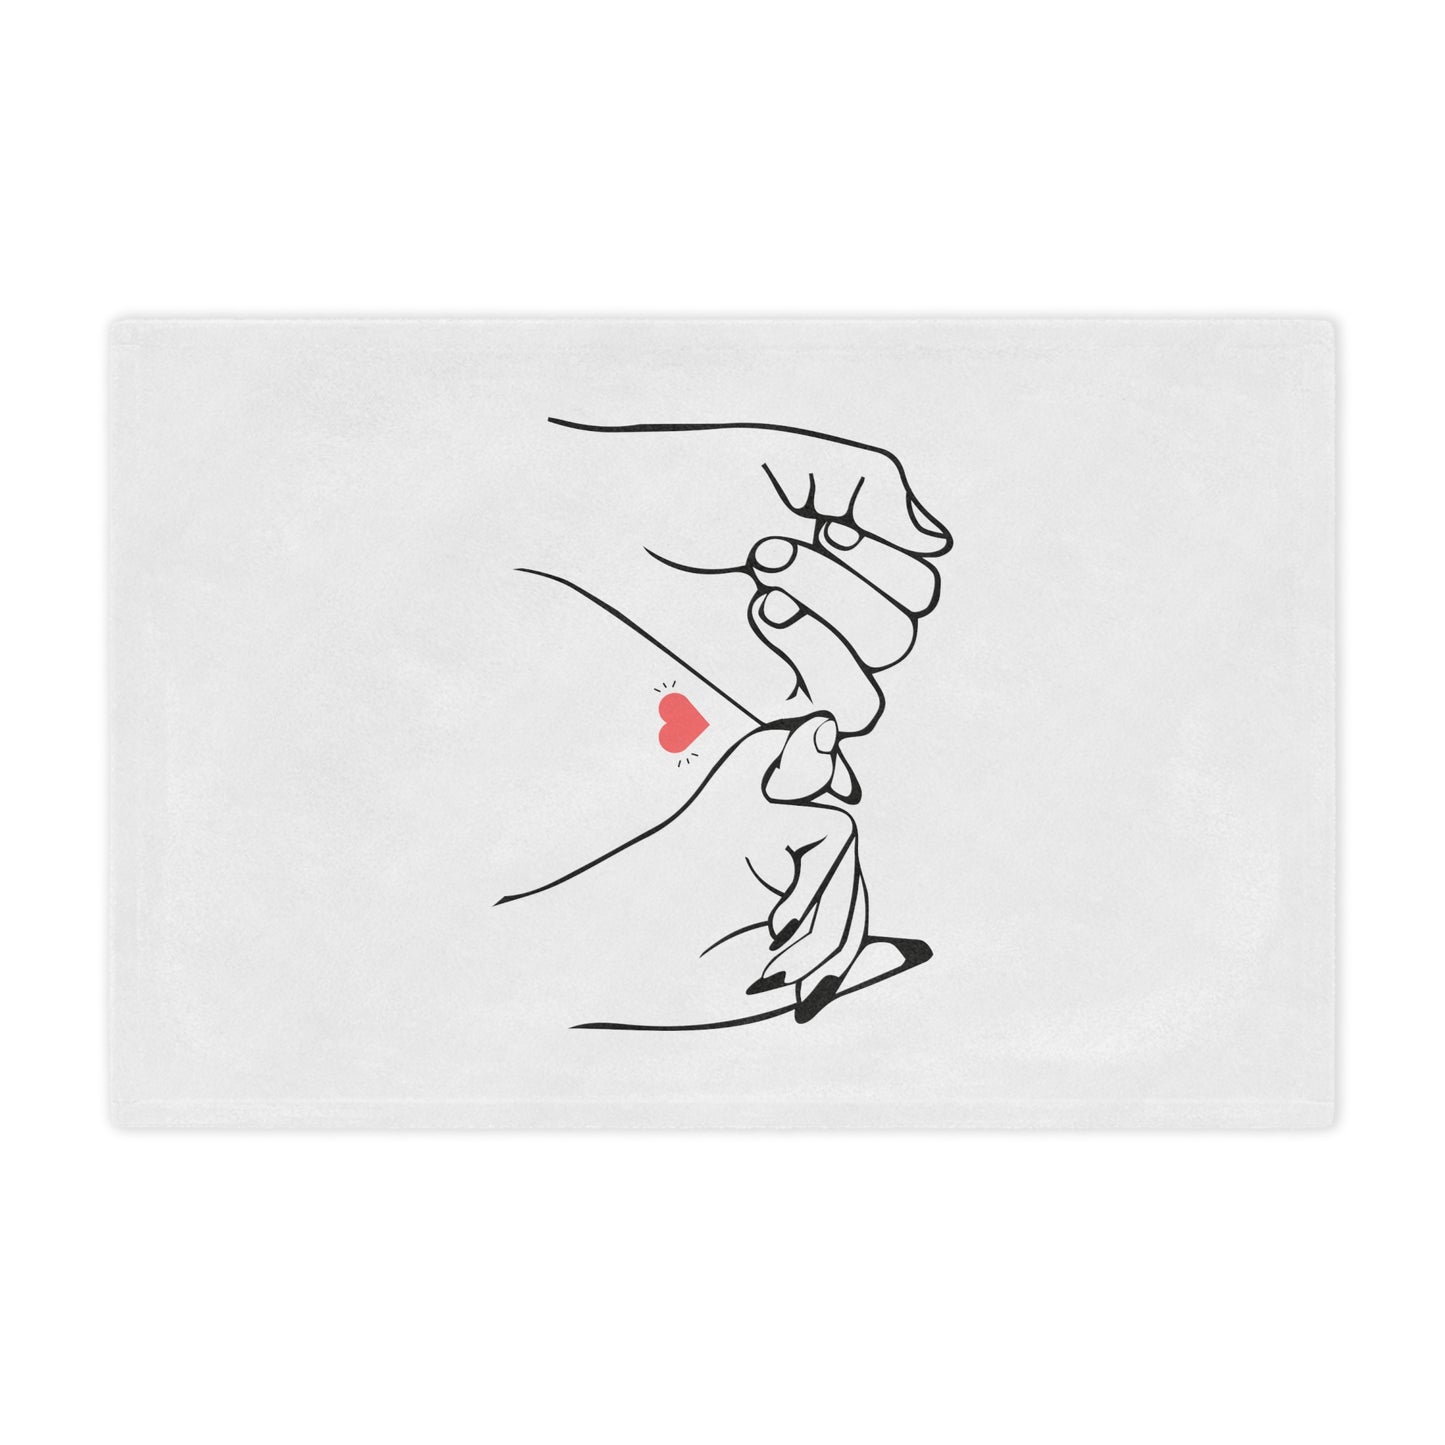 Couple's Hand with Love You Printed Valentine Minky Blanket